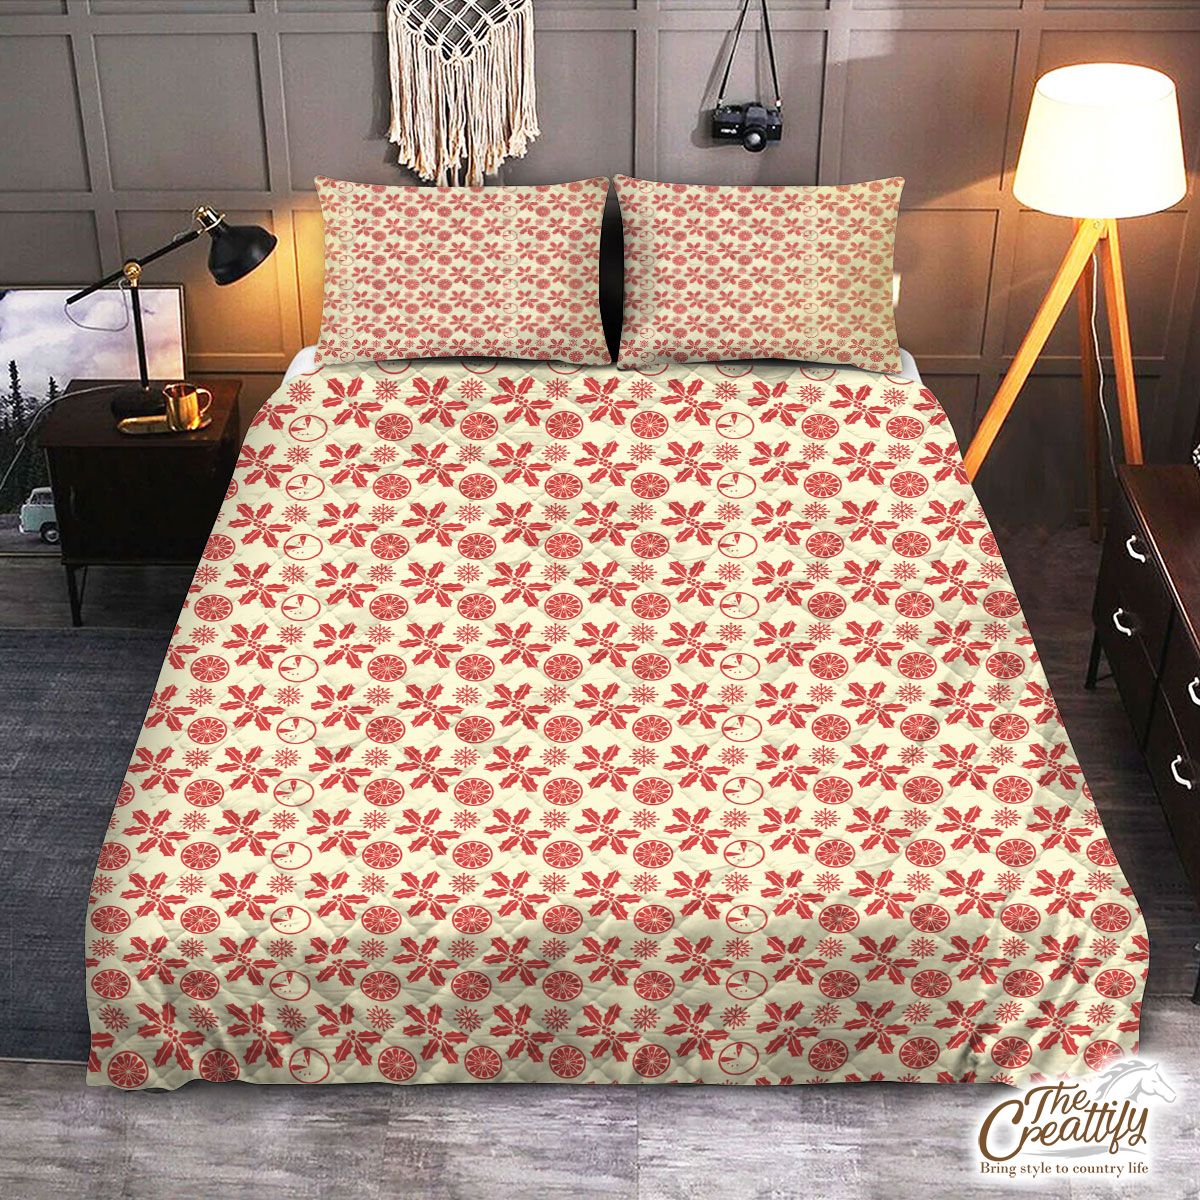 Red And Light Yellow Holly Leaf, Snow Flake Christmas Quilt Set